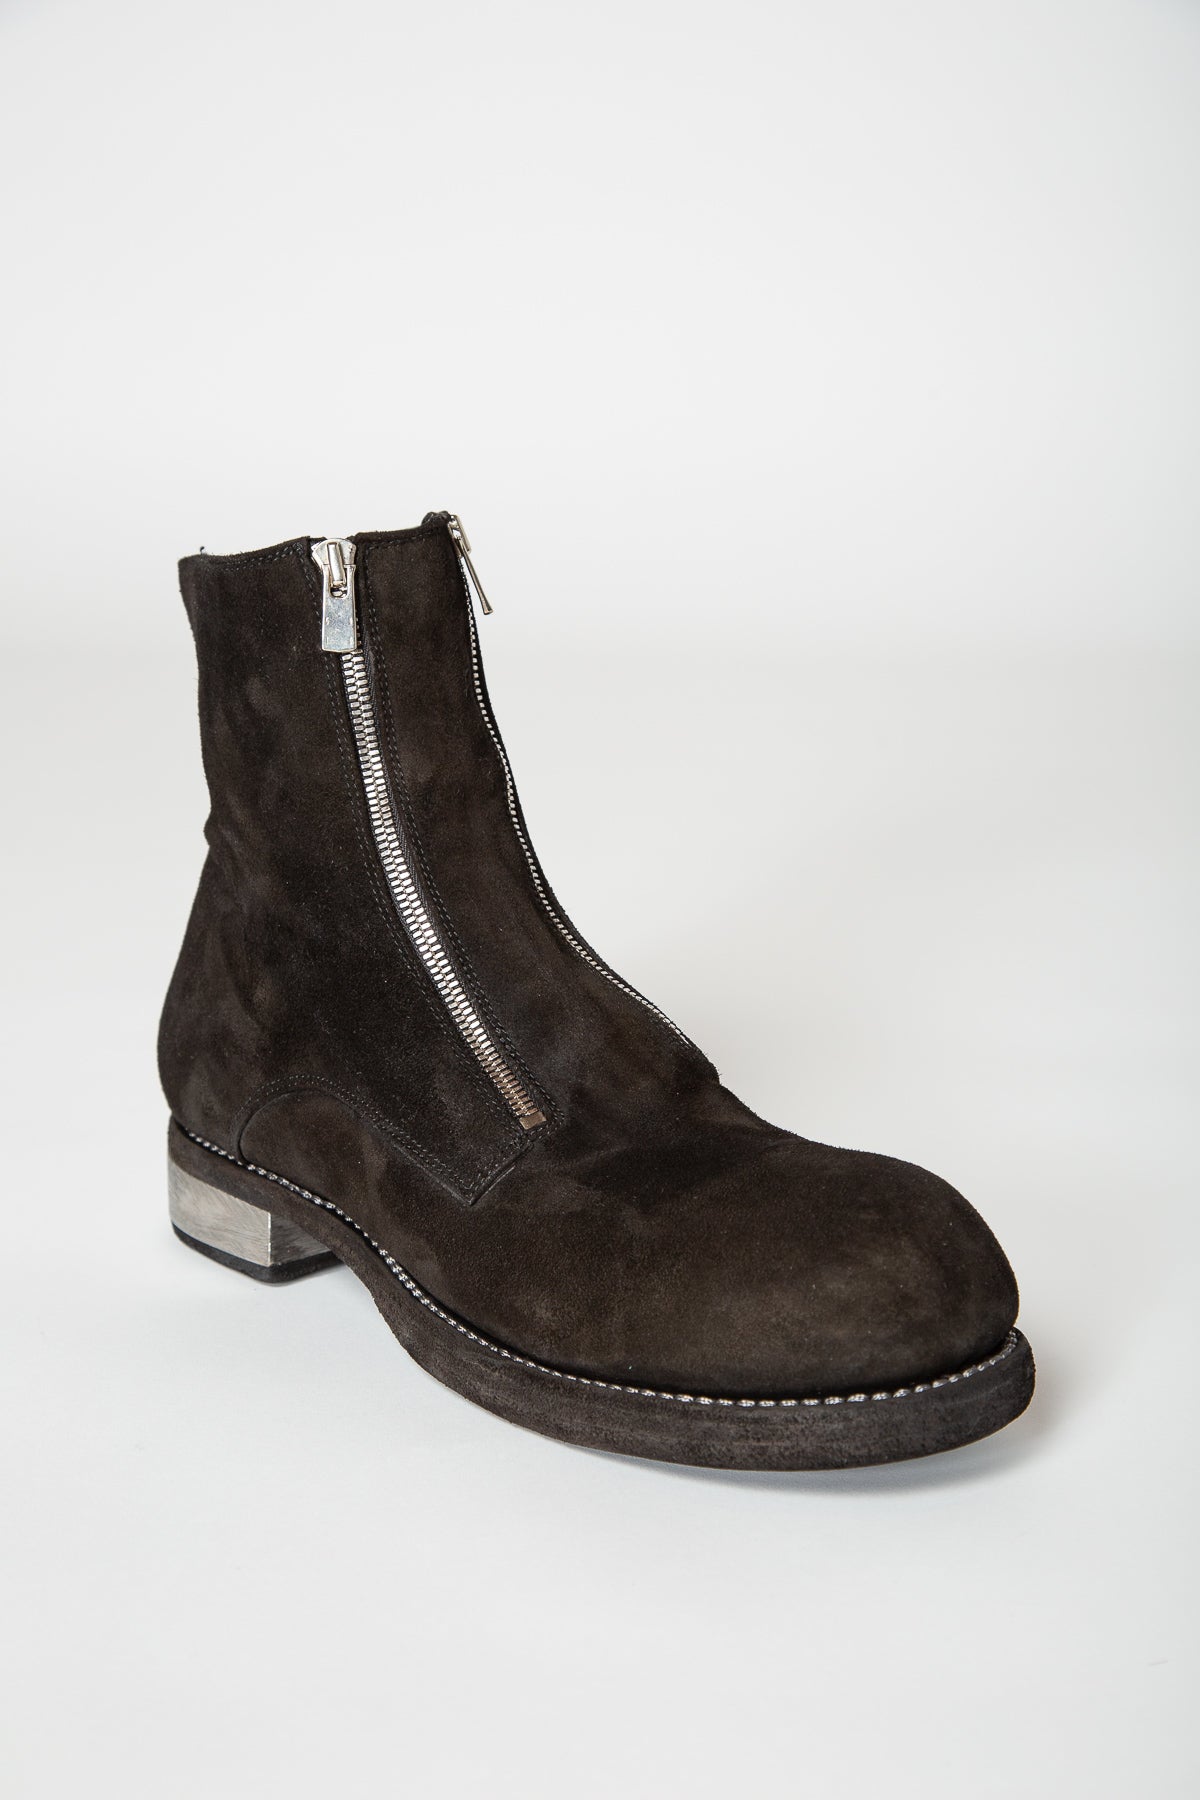 GUIDI | DOUBLE ZIP BIG DADDY BOOTS